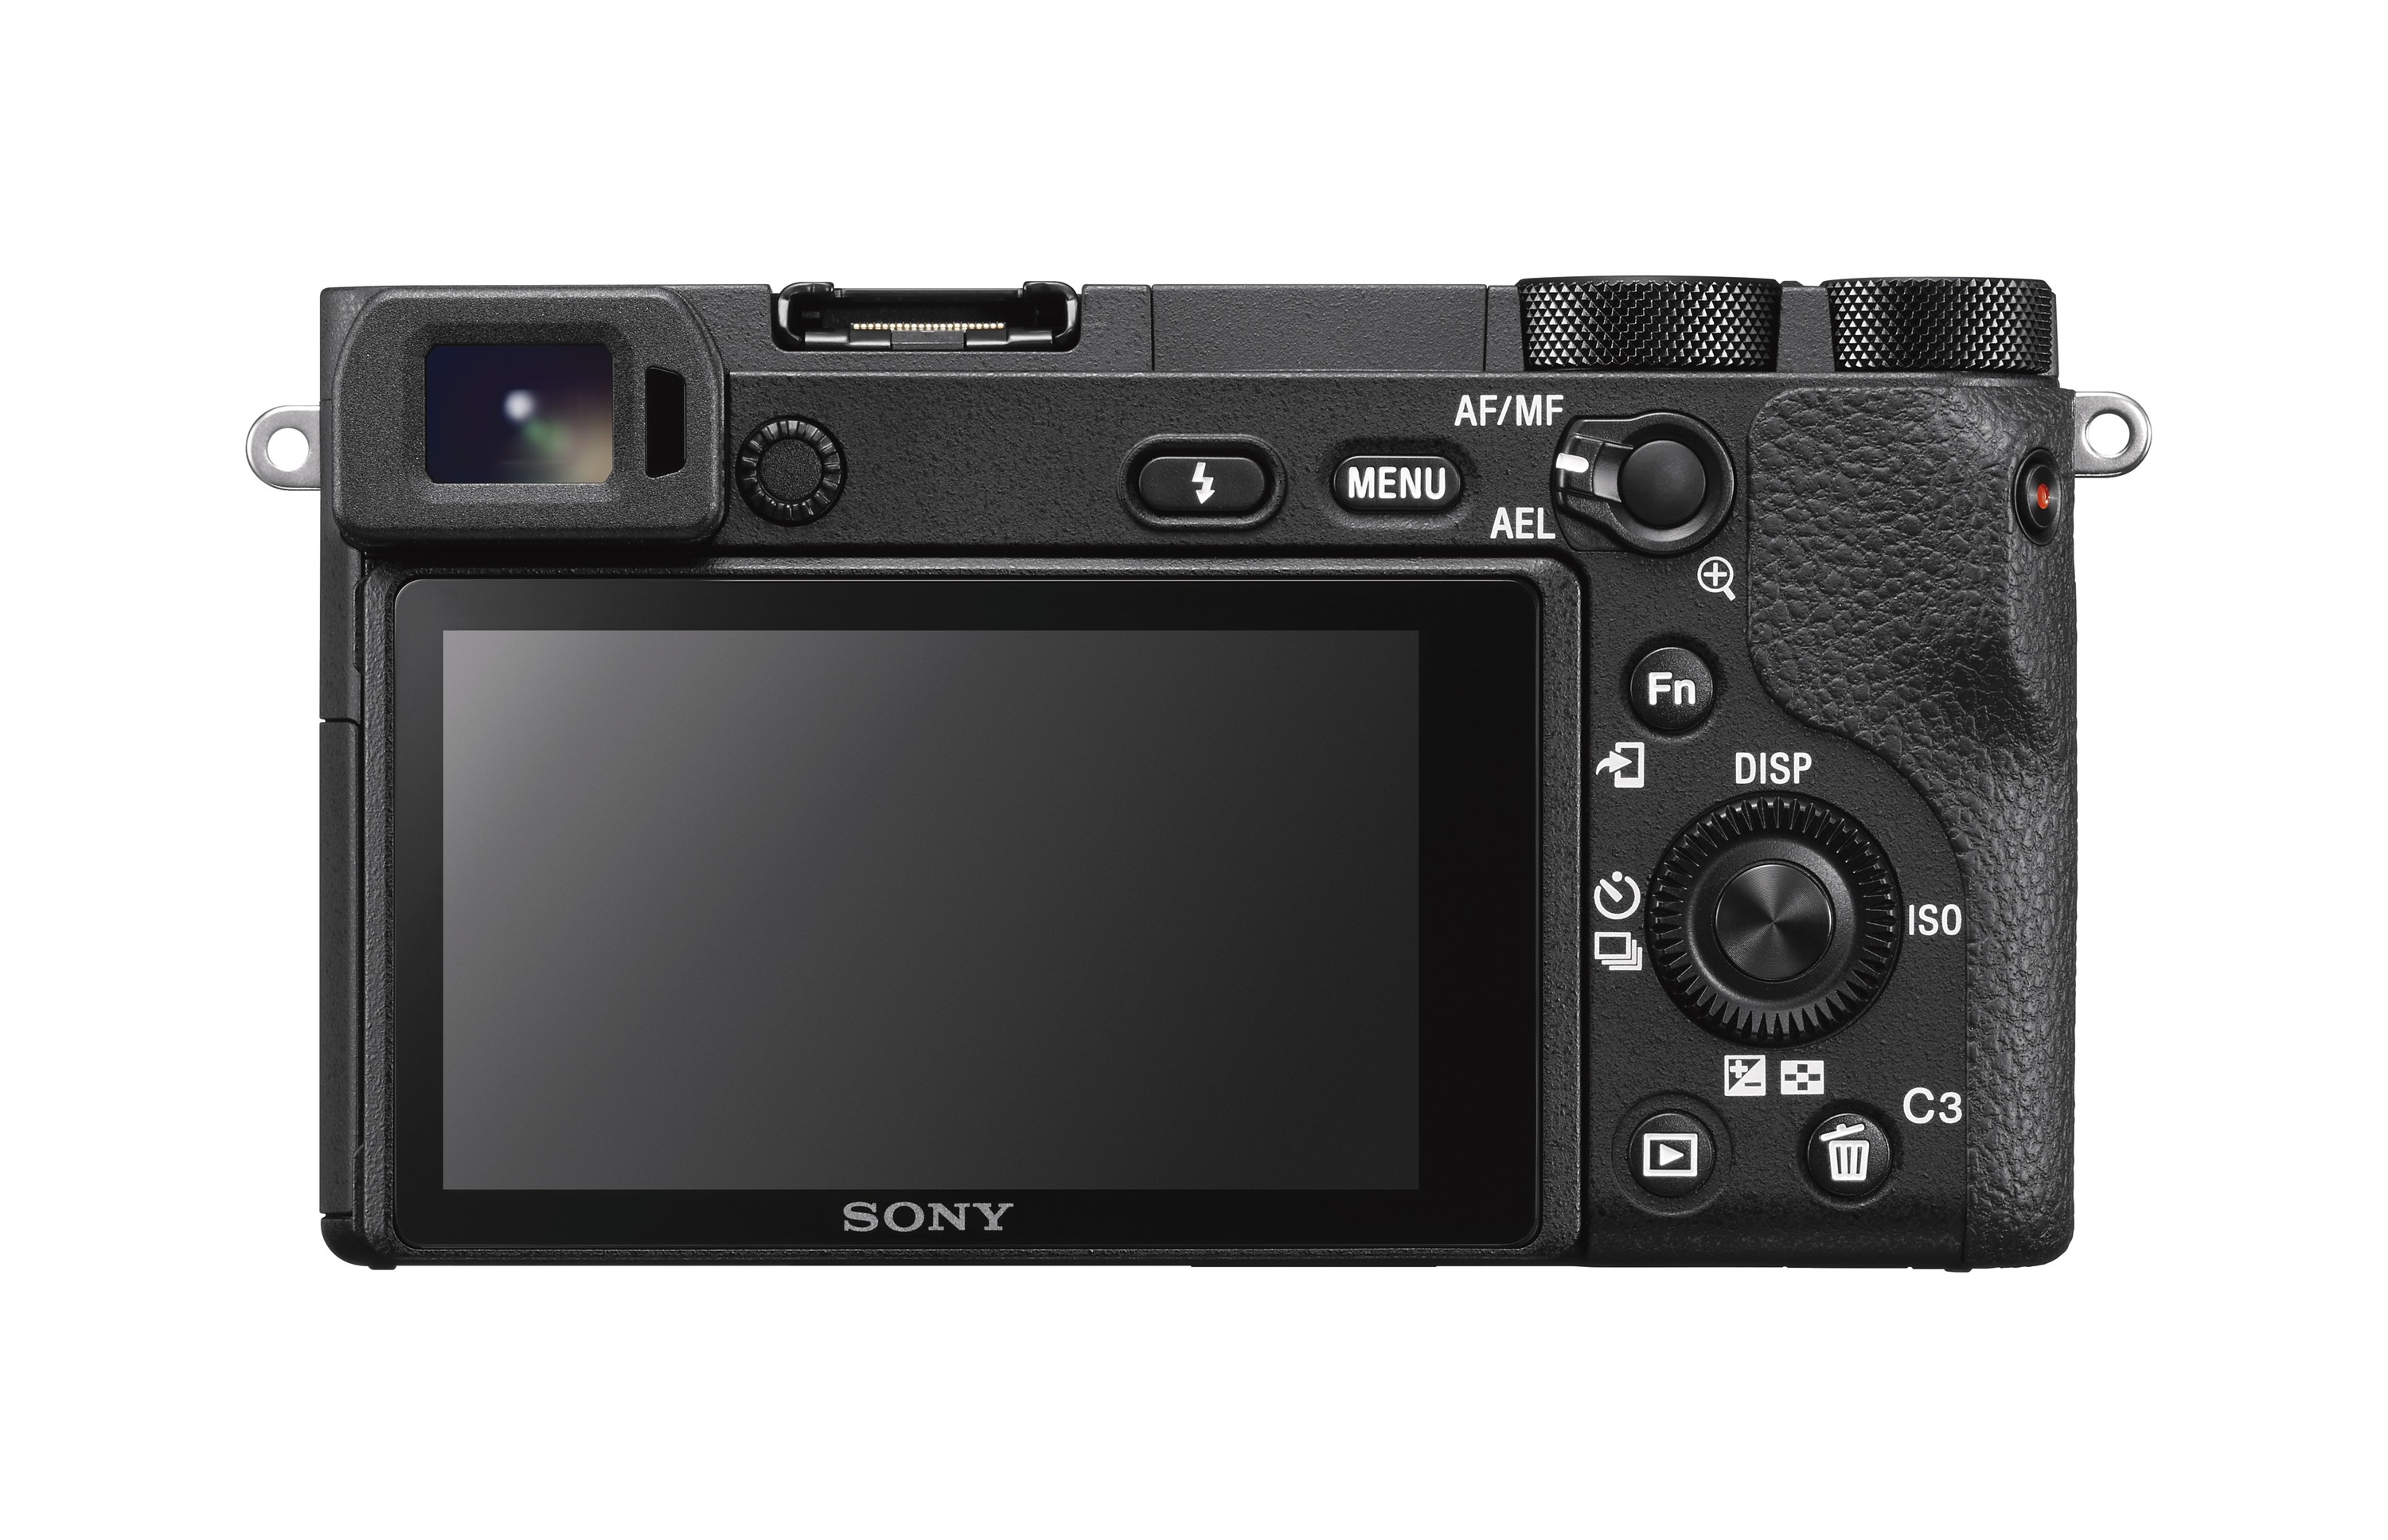 Sony Alpha a6500 Mirrorless Interchangeable-lens Camera - Black - image 6 of 7